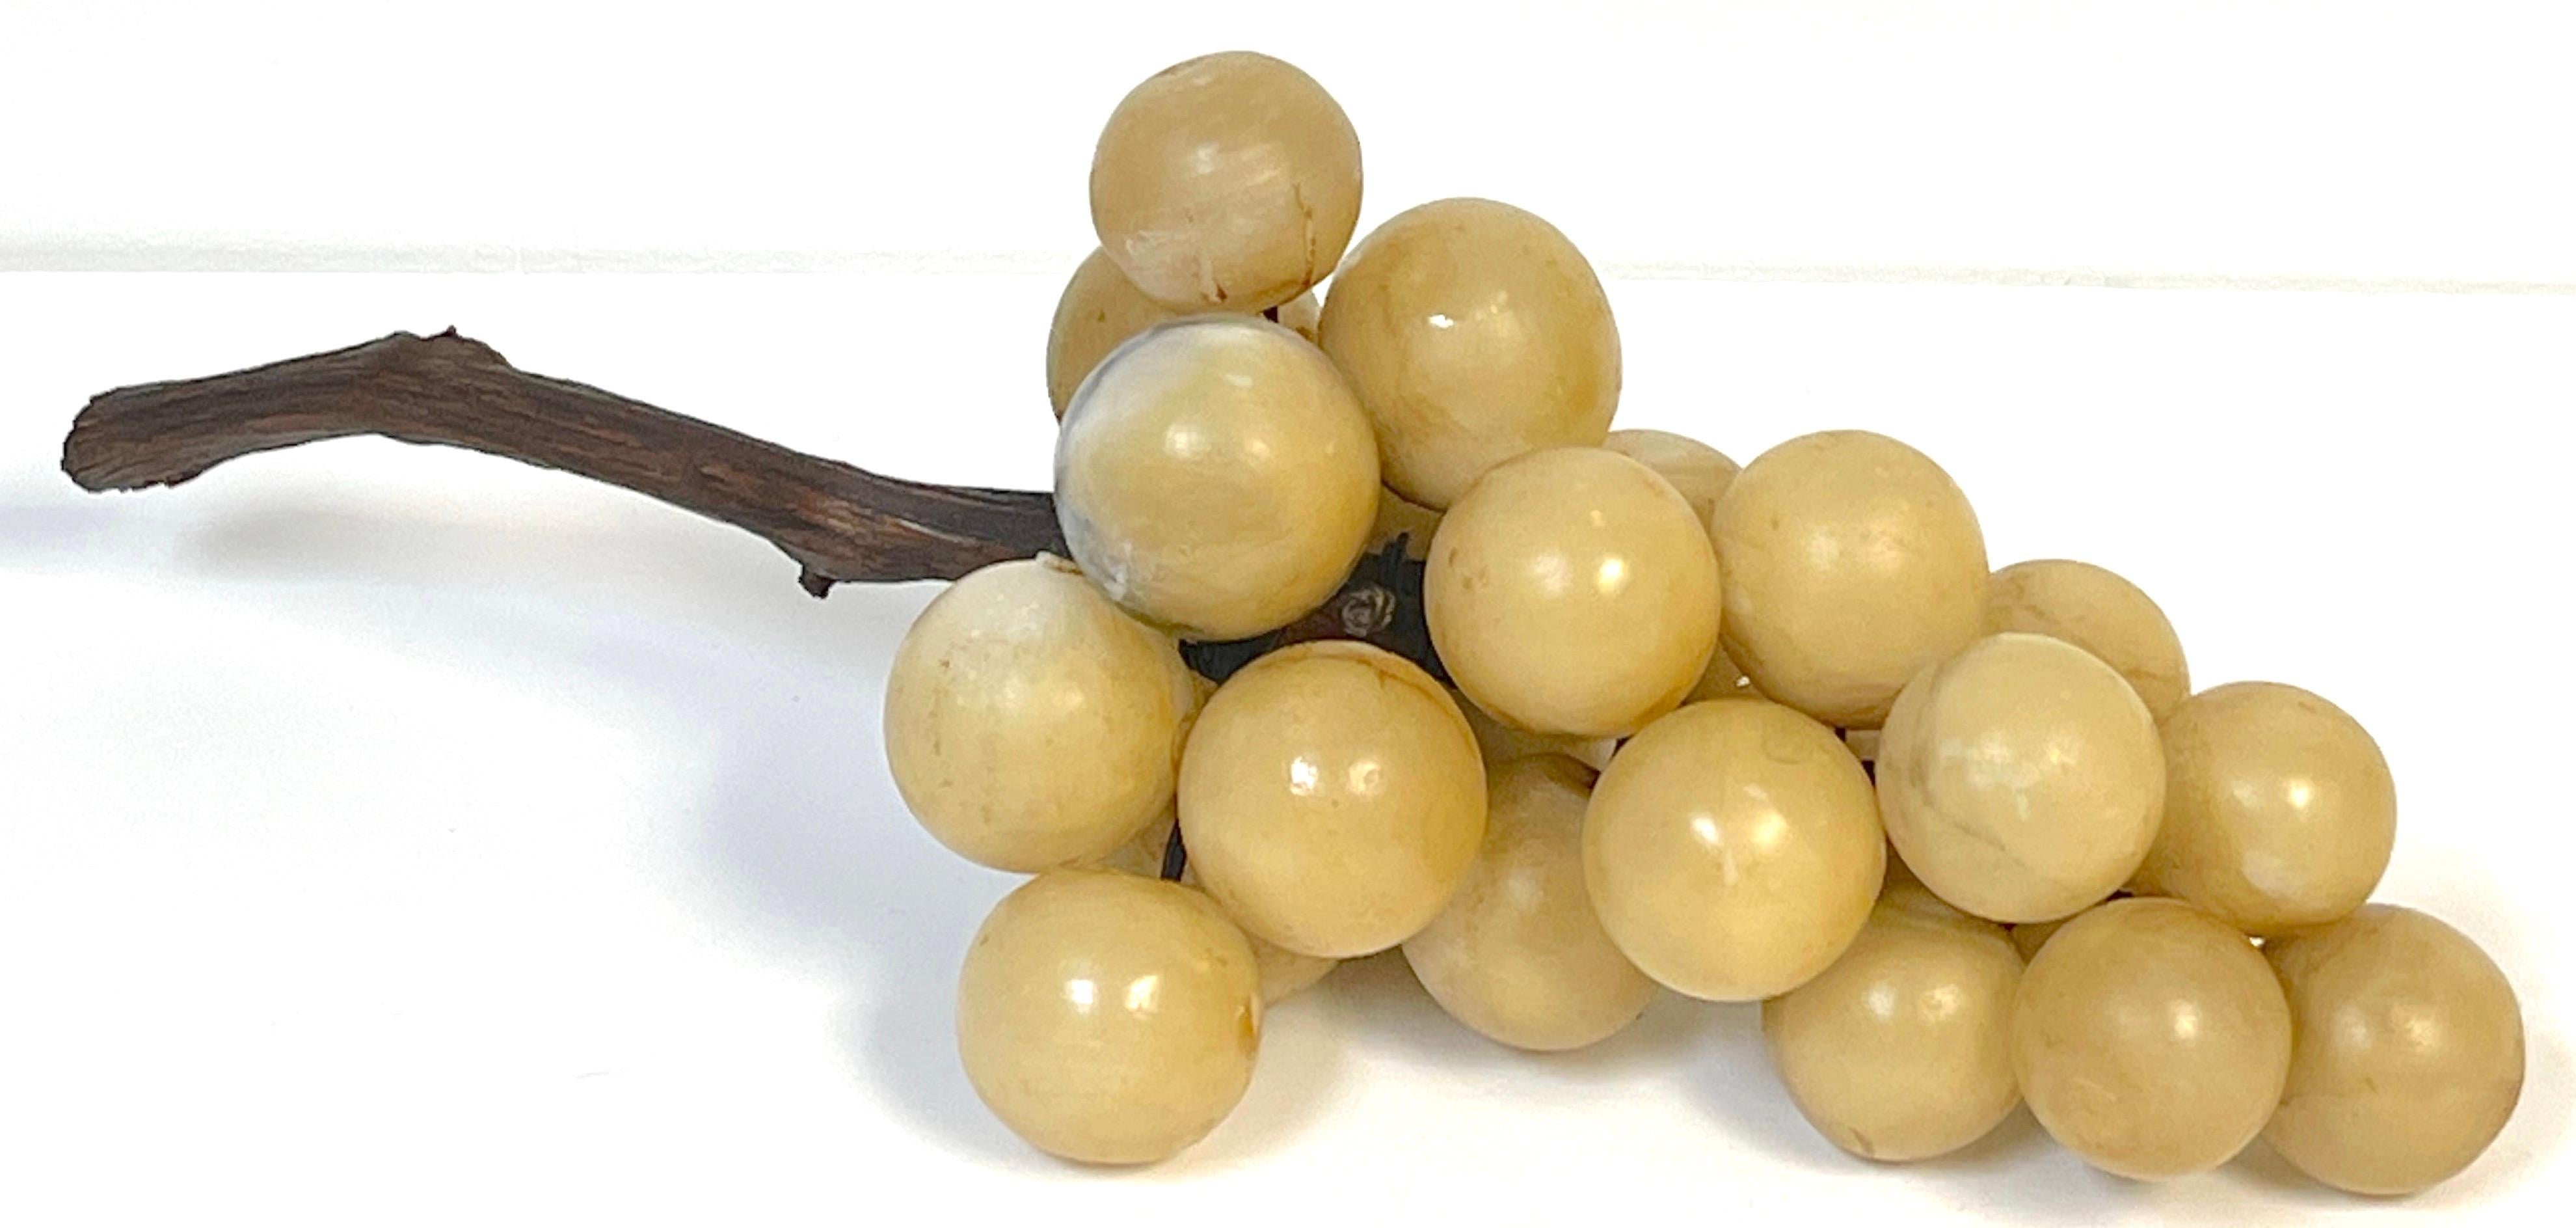 Midcentury Italian marble & fruitwood grape cluster
Italy, 1970s
A good size example with natural root stem. 
Ready to place.